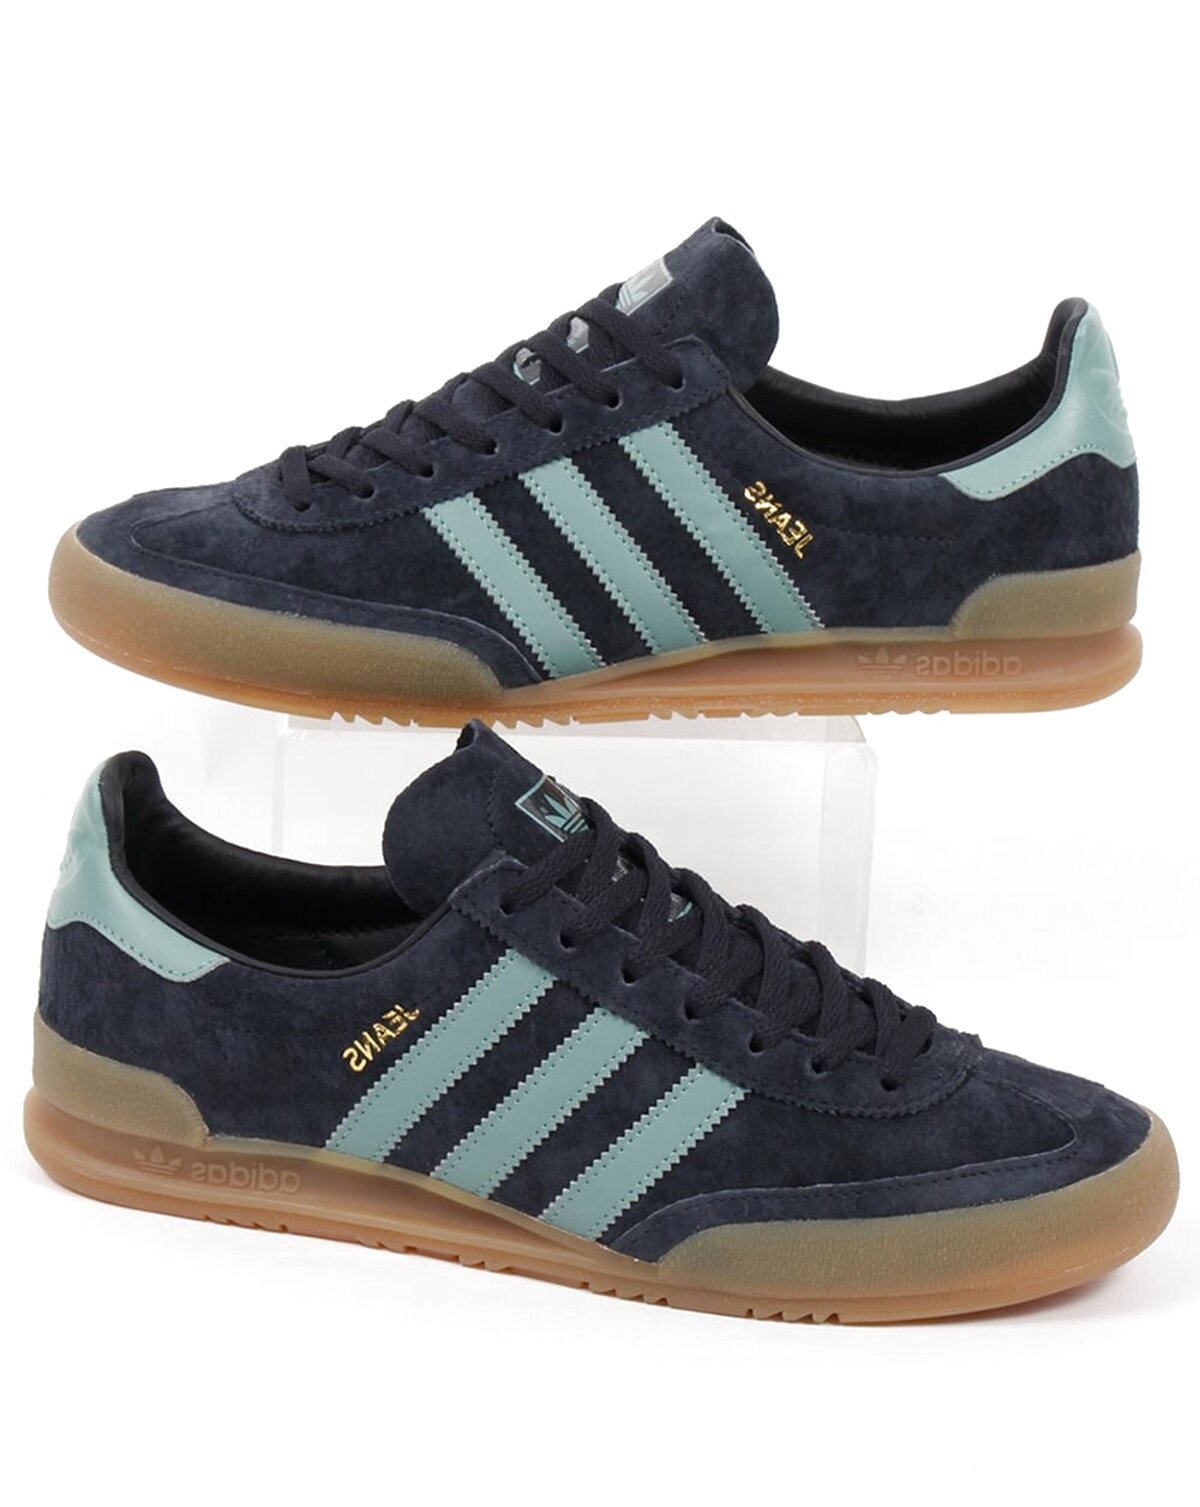 adidas jeans navy and sky blue